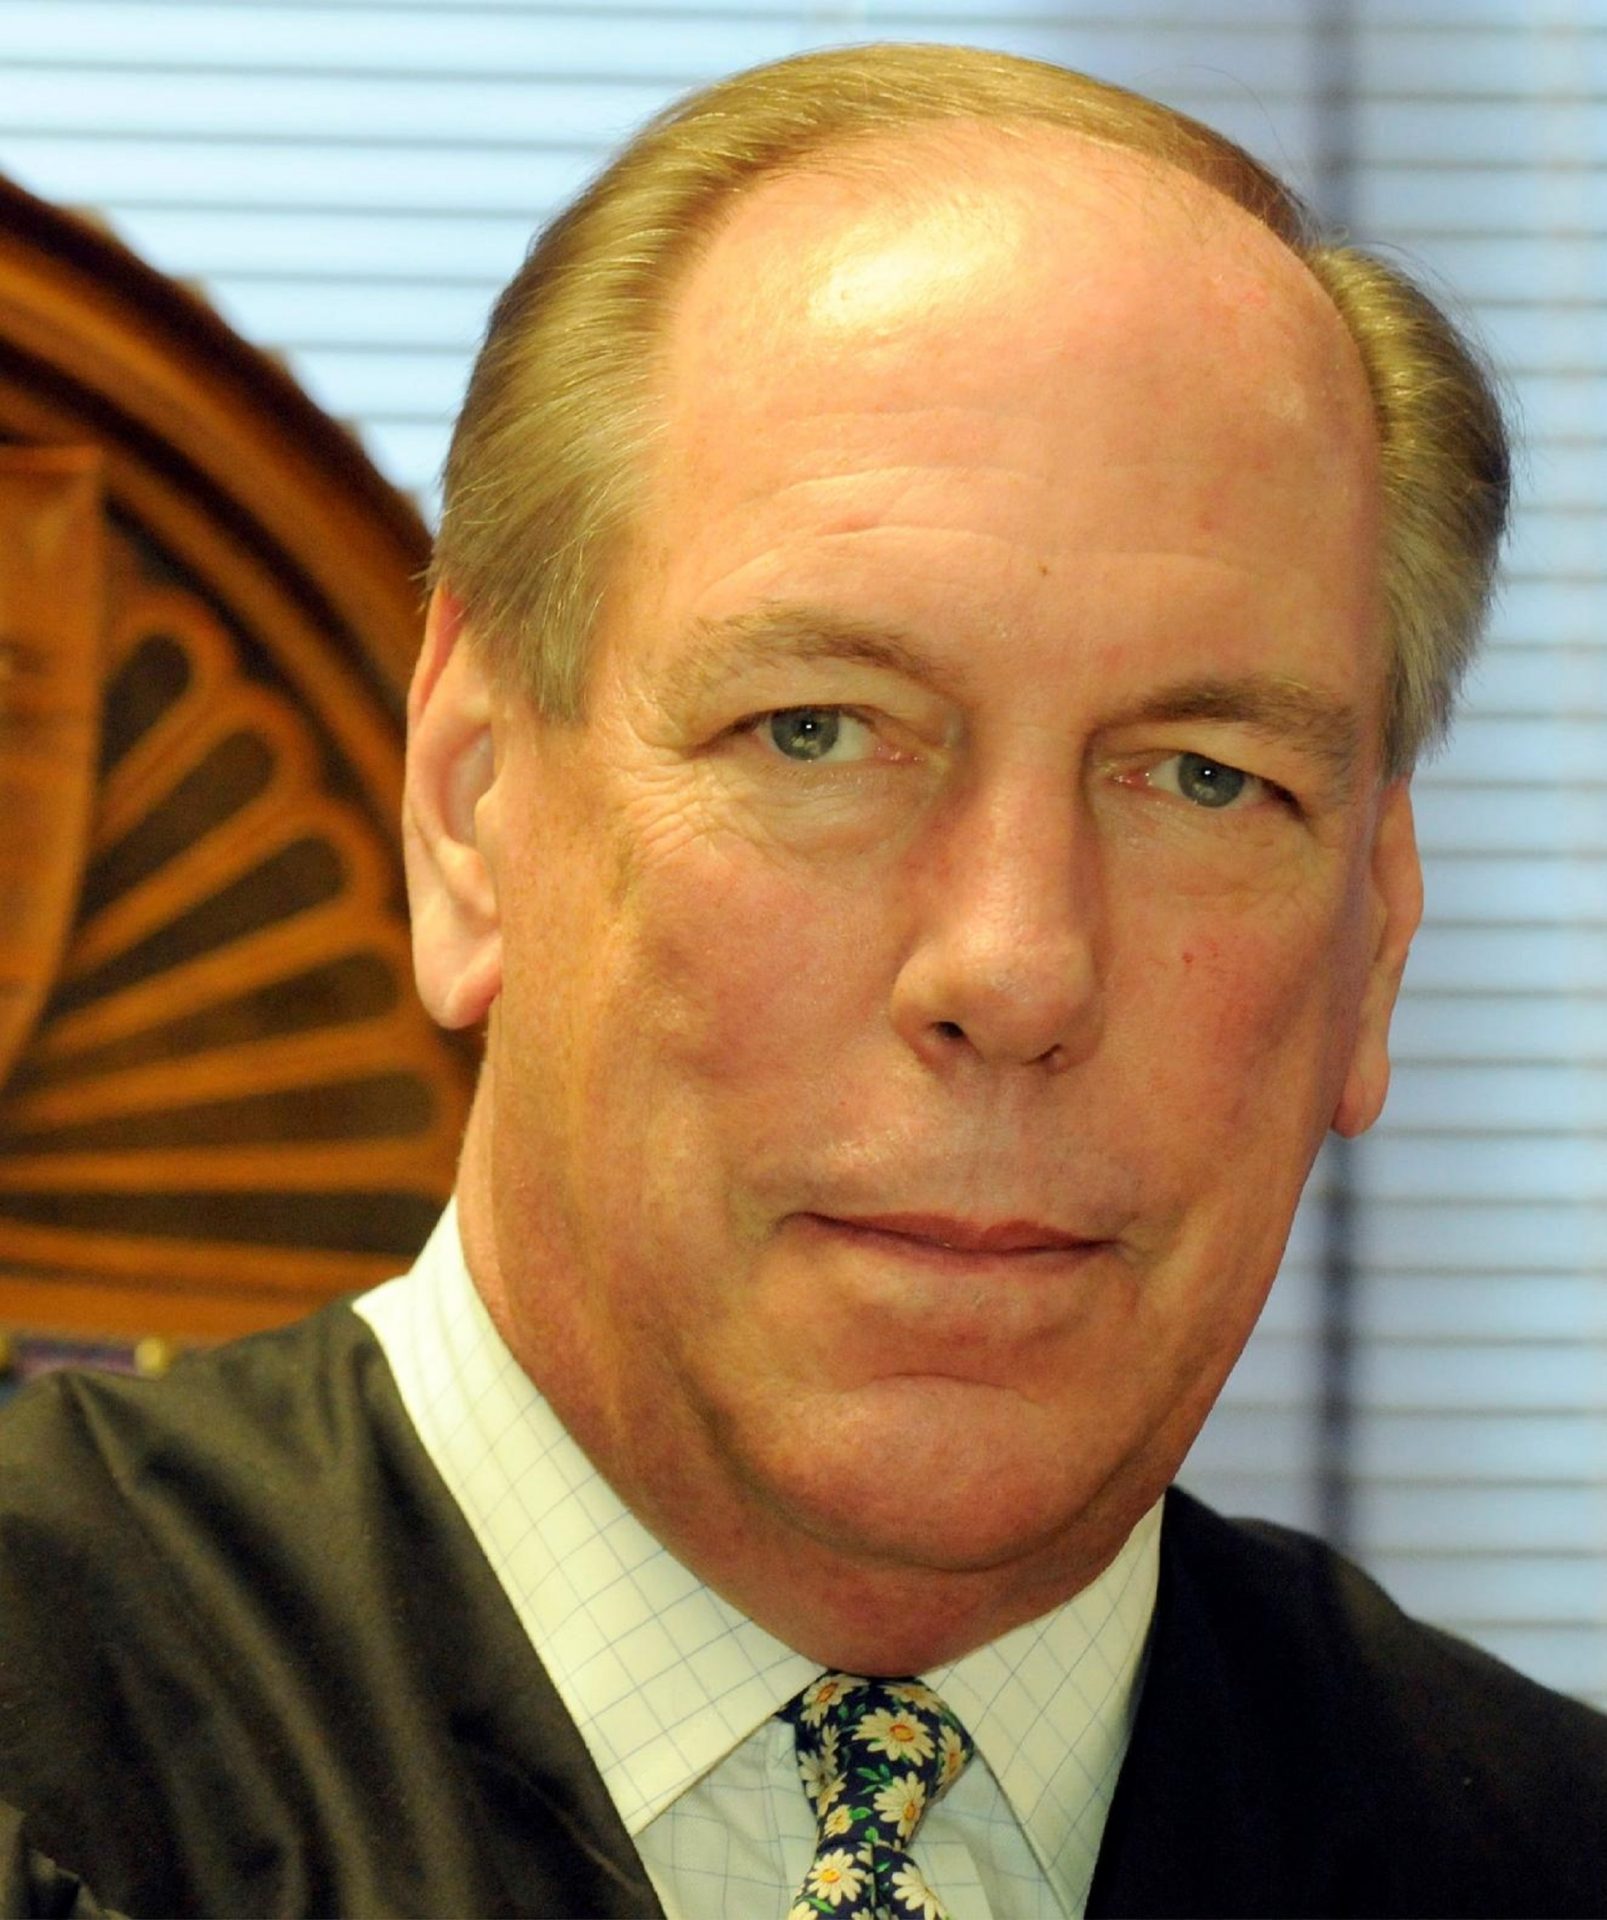 Allegheny County Common Pleas judge Jeffrey Manning was a prosecutor for 16 years, first with the county's District Attorney's Office and then with the U.S. Attorney's Office for western Pennsylvania.